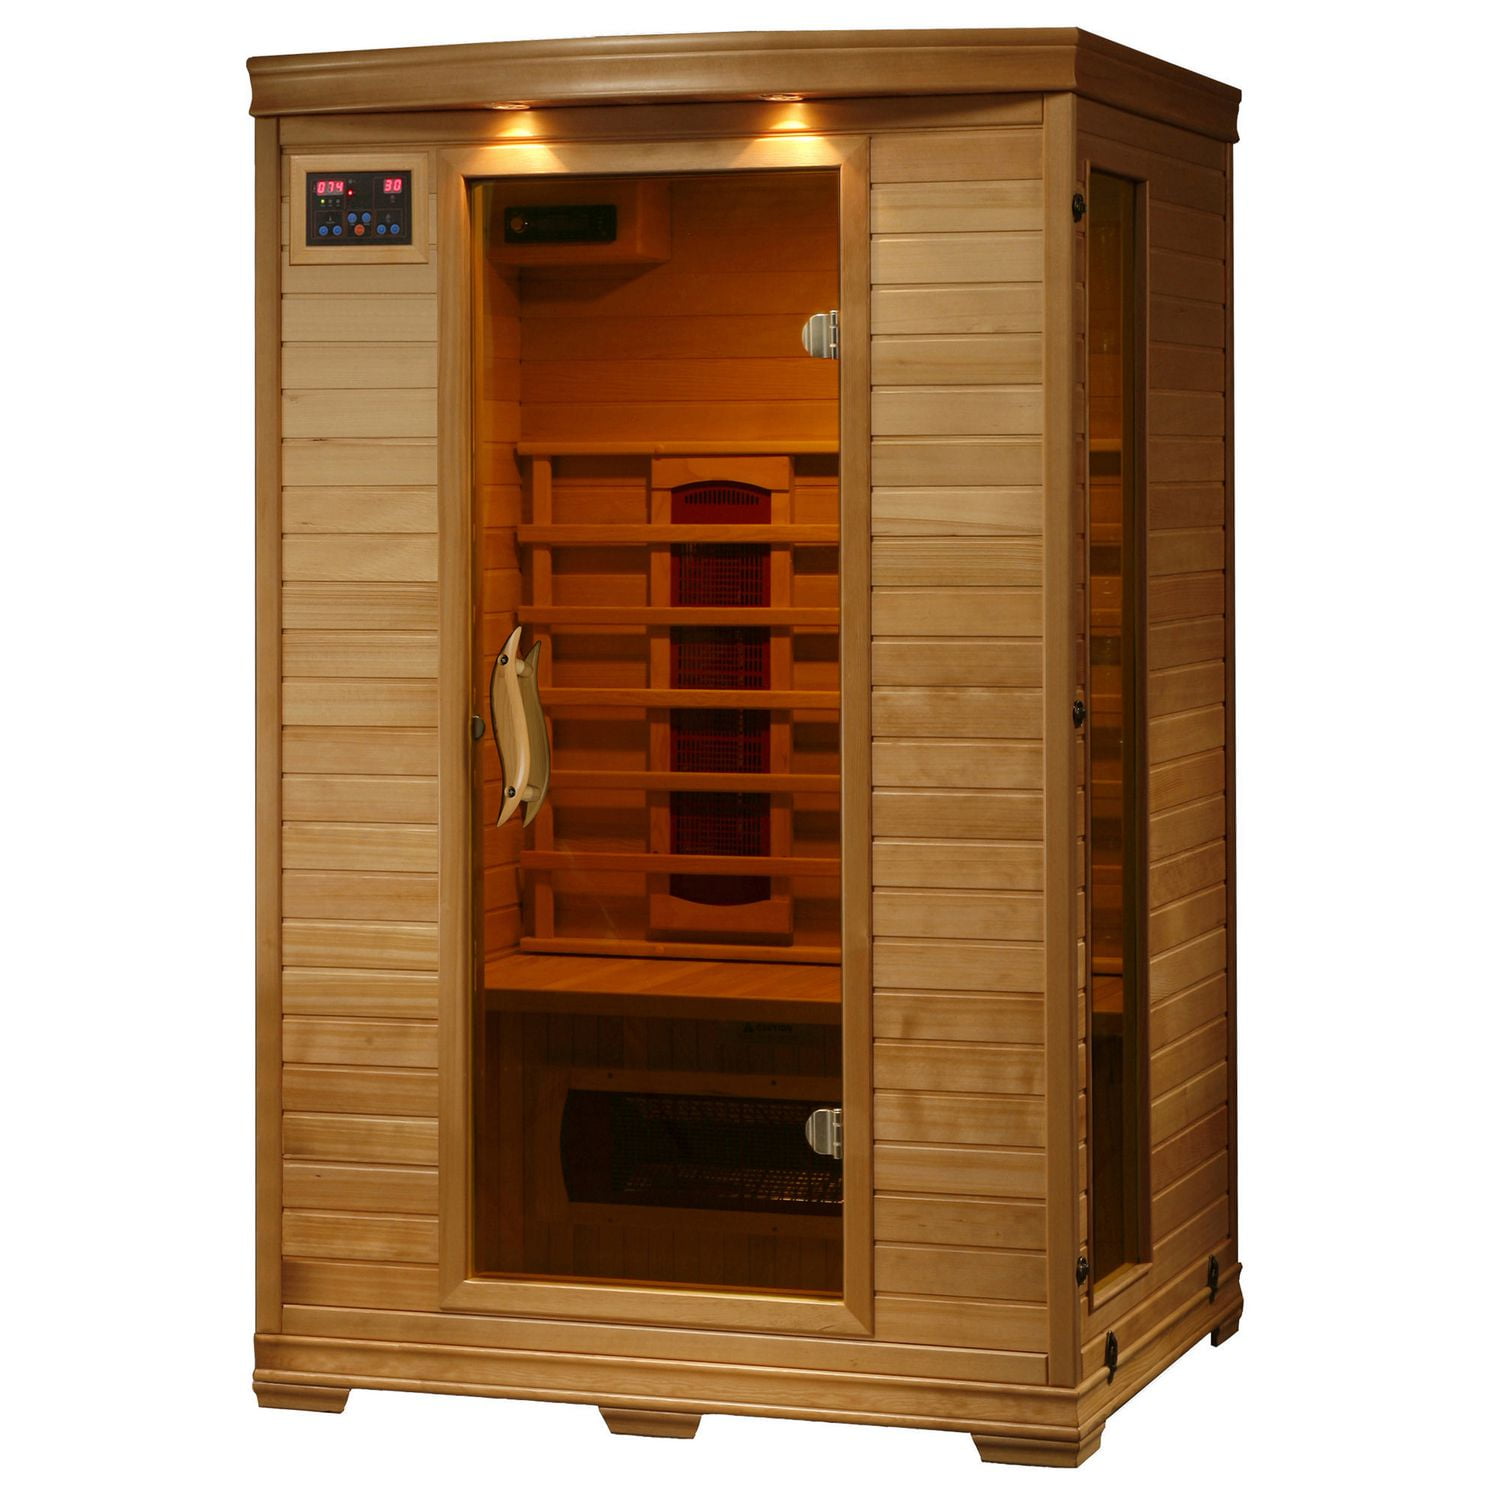 Infrared Sauna Facts – Tagged FIR heat therapy – Rocky Mountain